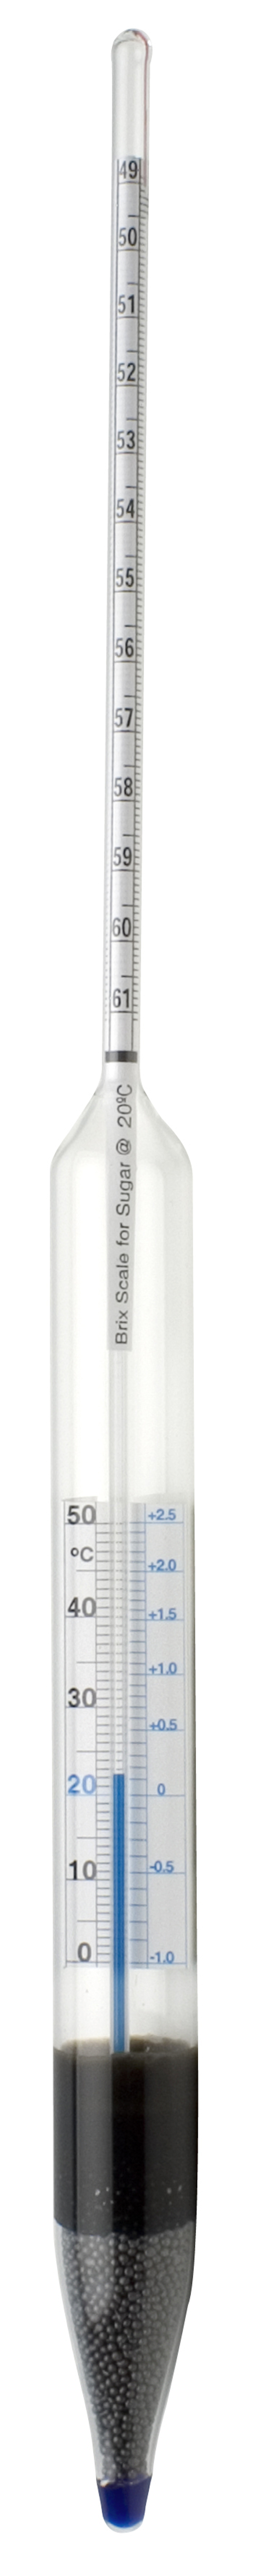 SP Bel-Art, H-B DURAC Safety 59/71 Degree Brix Sugar Scale Combined Form Thermo-Hydrometer